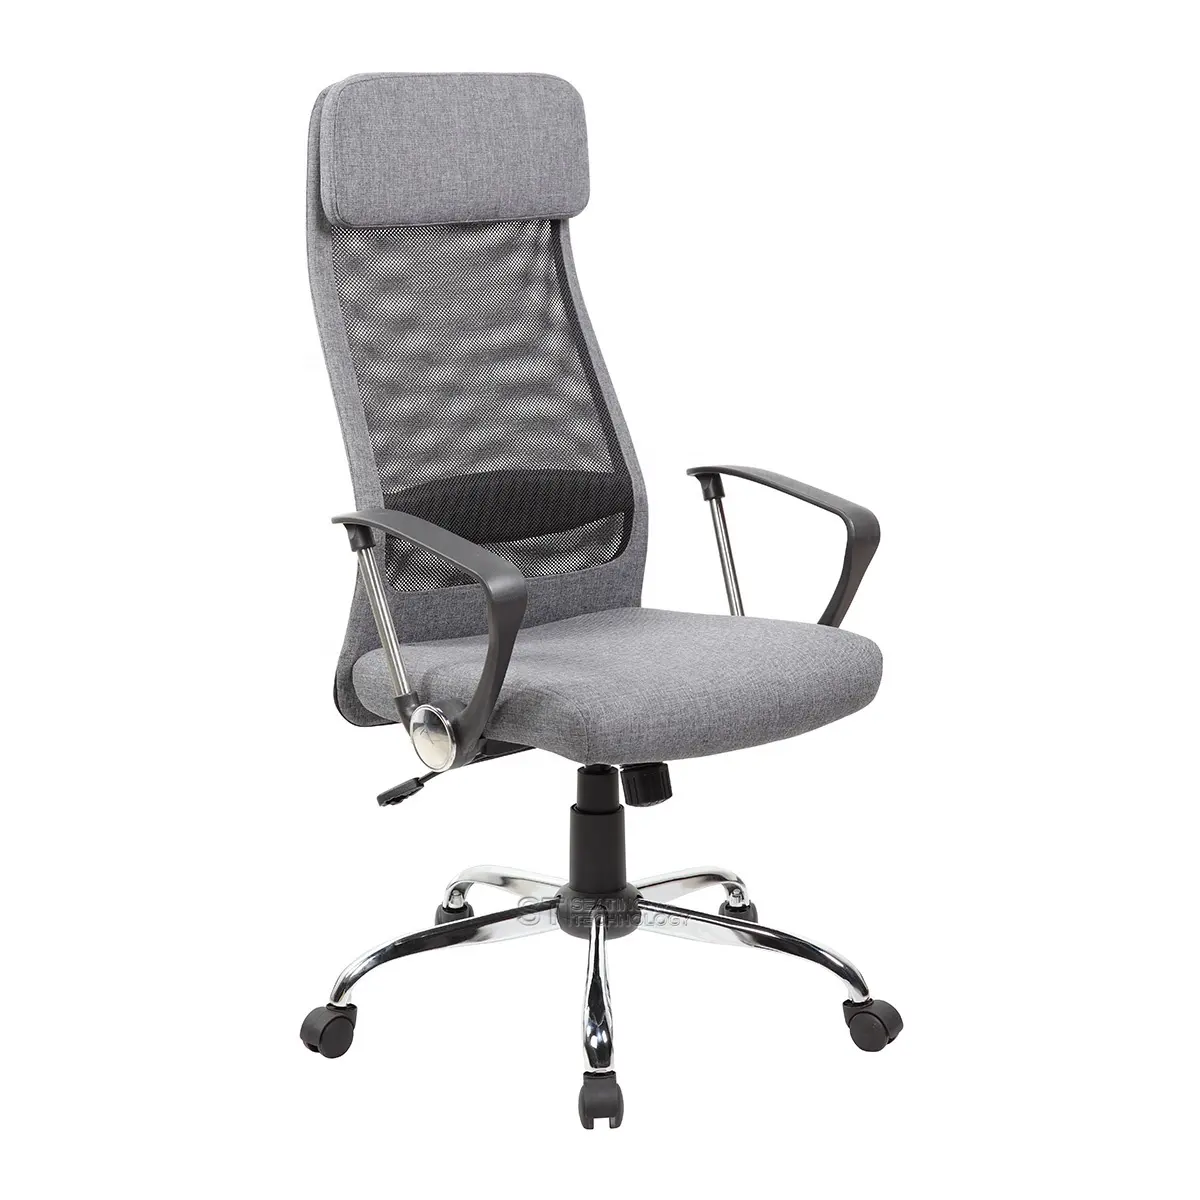 Eurostile 2022 Height Adjustable Executive Comfortable Cushion Seat Office Working Mesh Chair